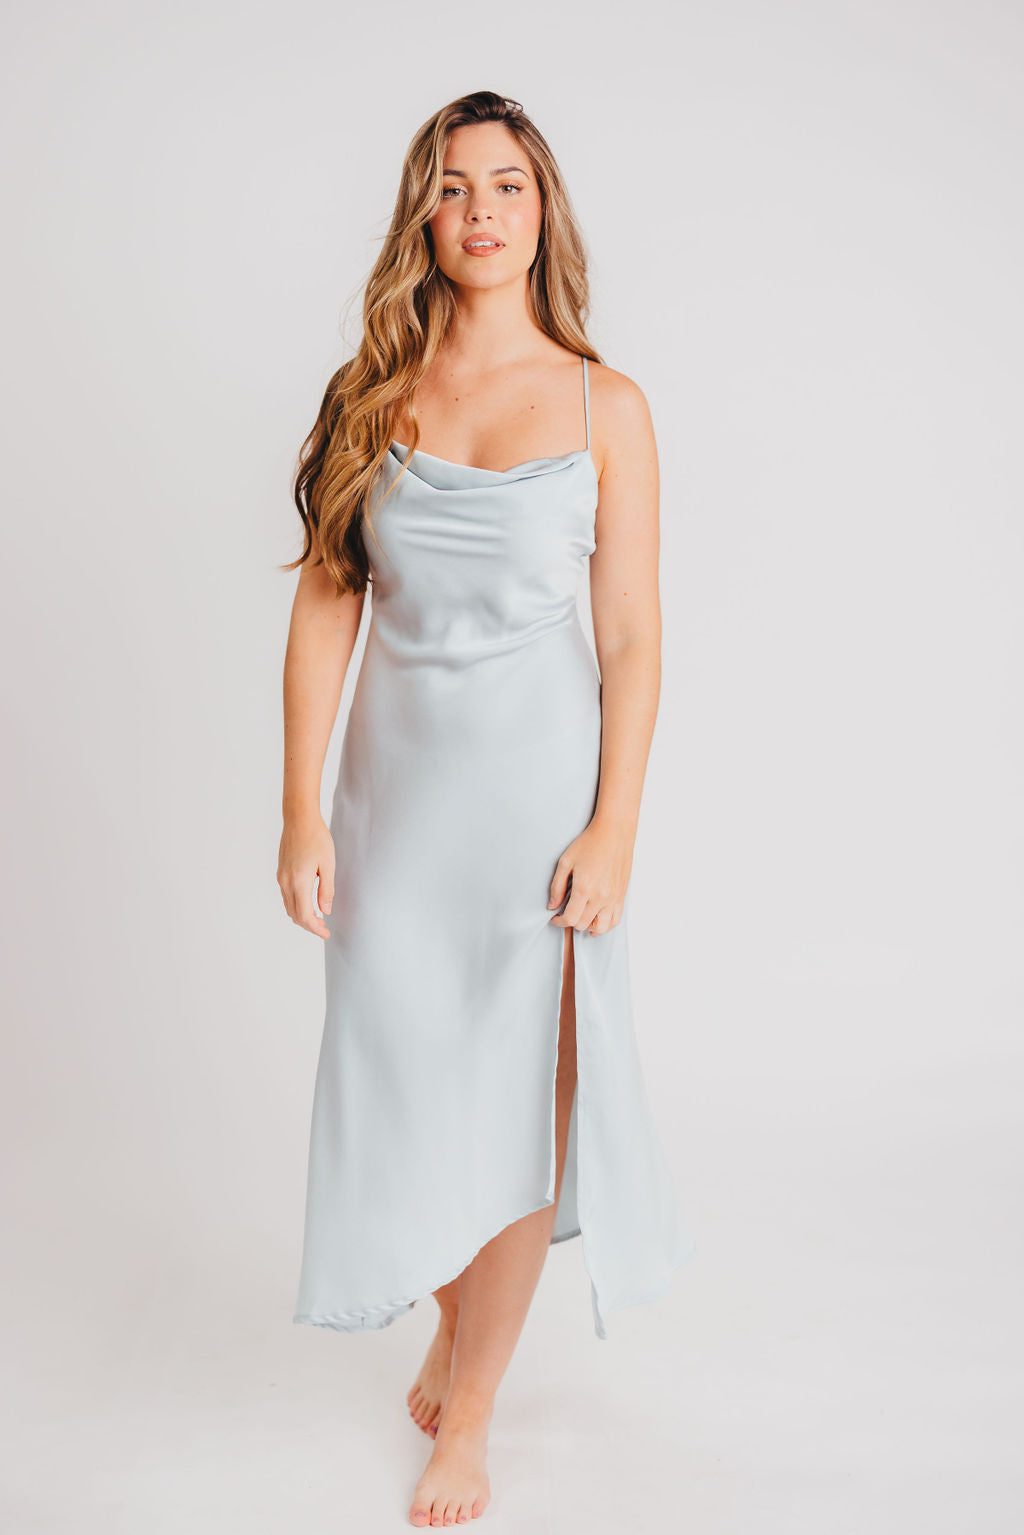 Gaia Dress by ASTR in Light Sage - Extended Sizes